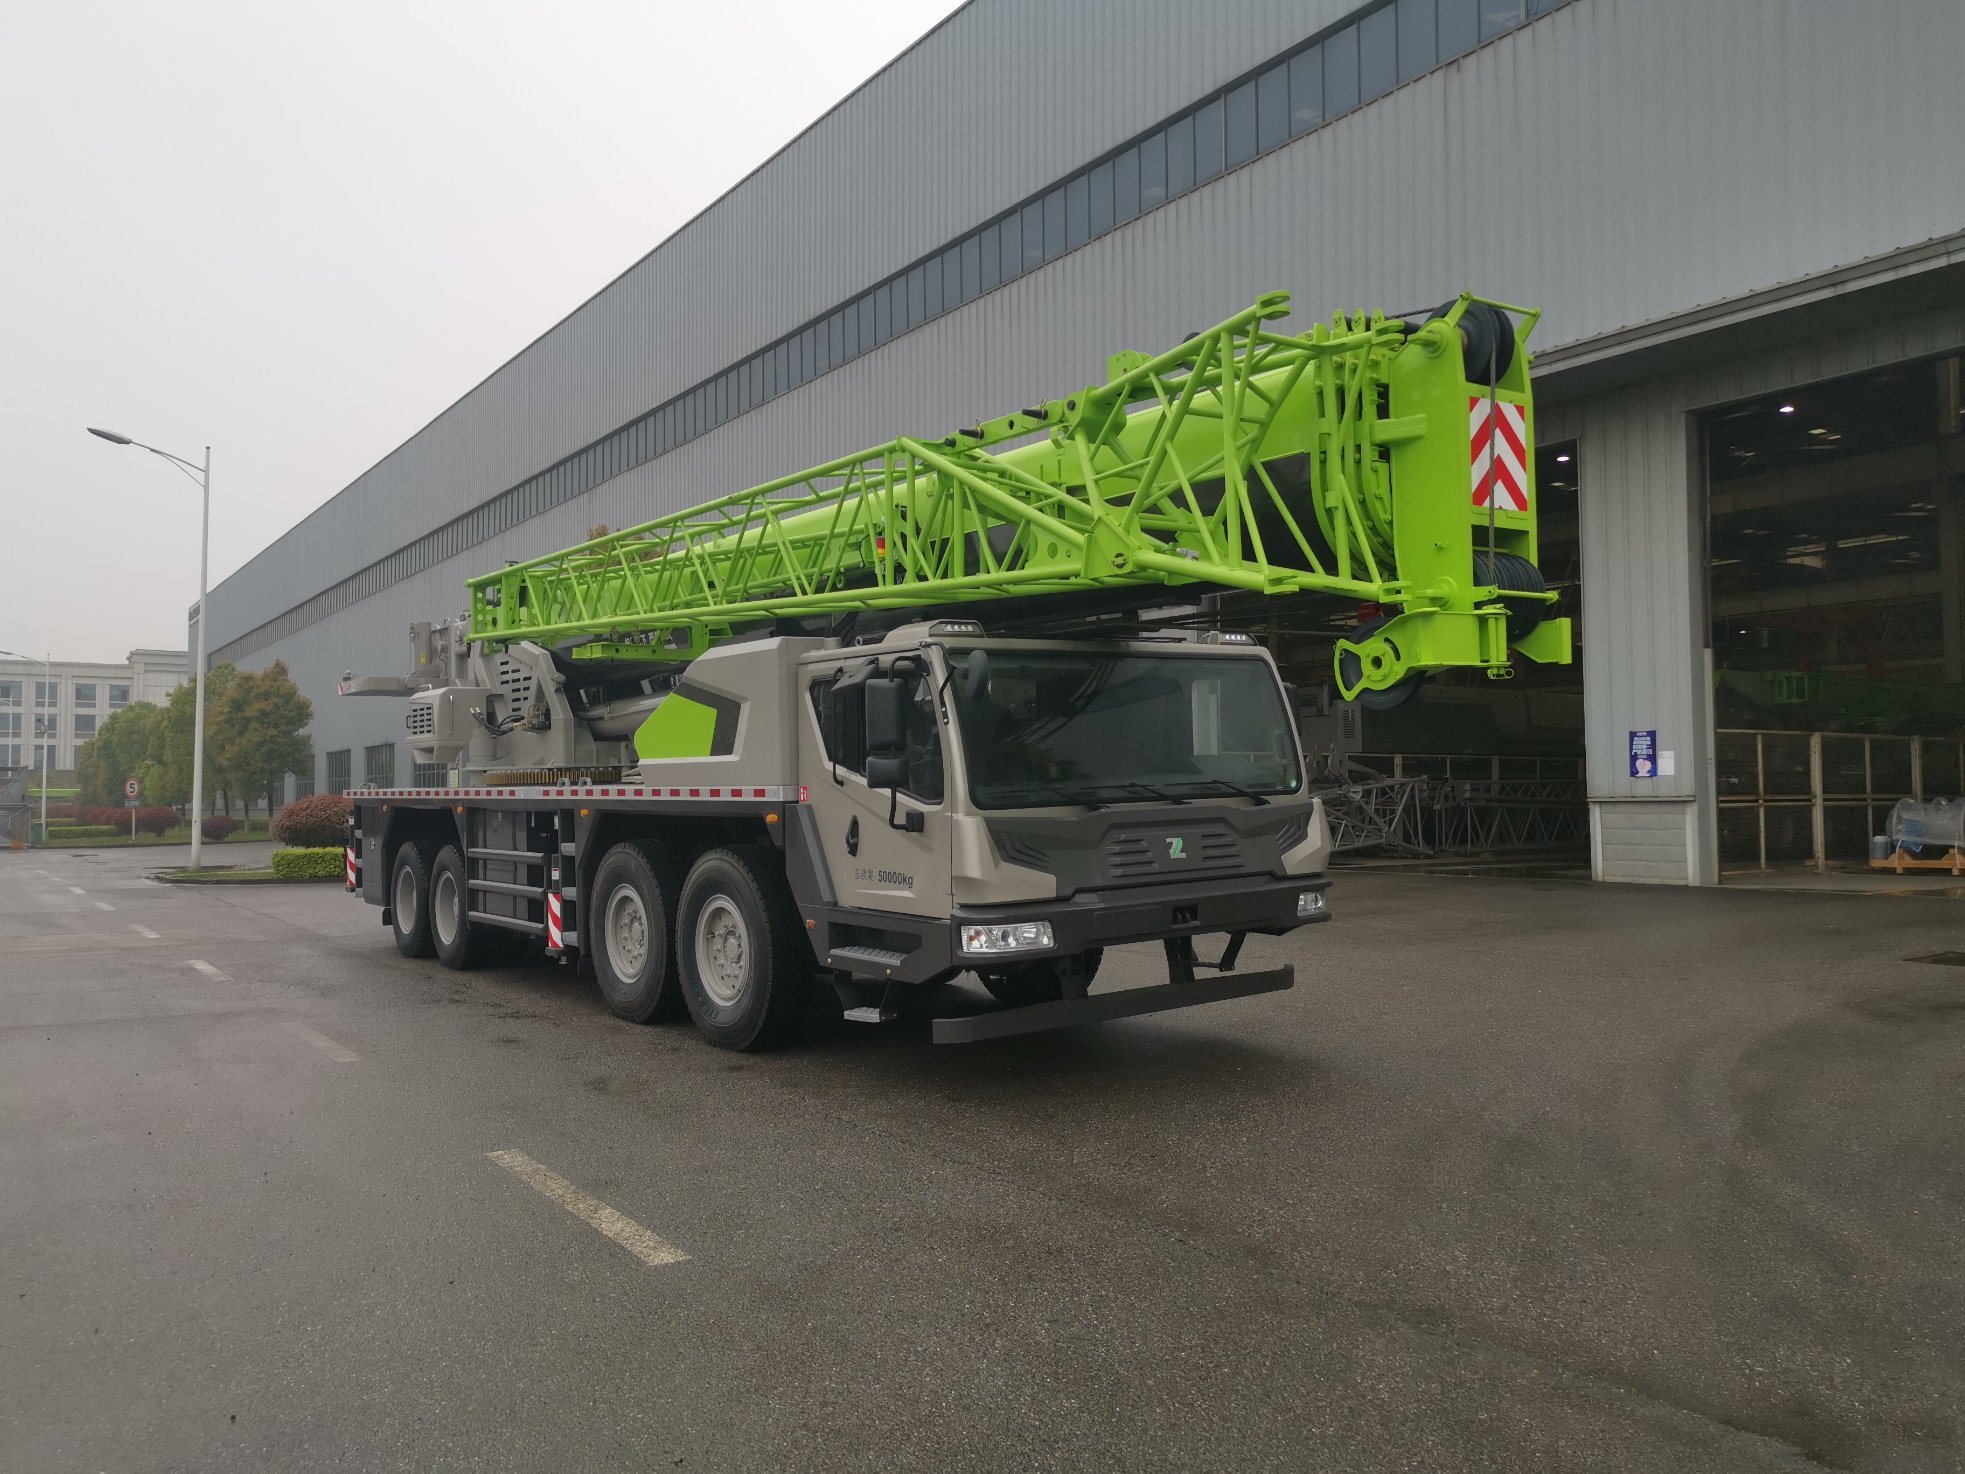 Zoomlion 80ton Hydraulic Truck Crane Ztc800e552 with 5 Section Boom